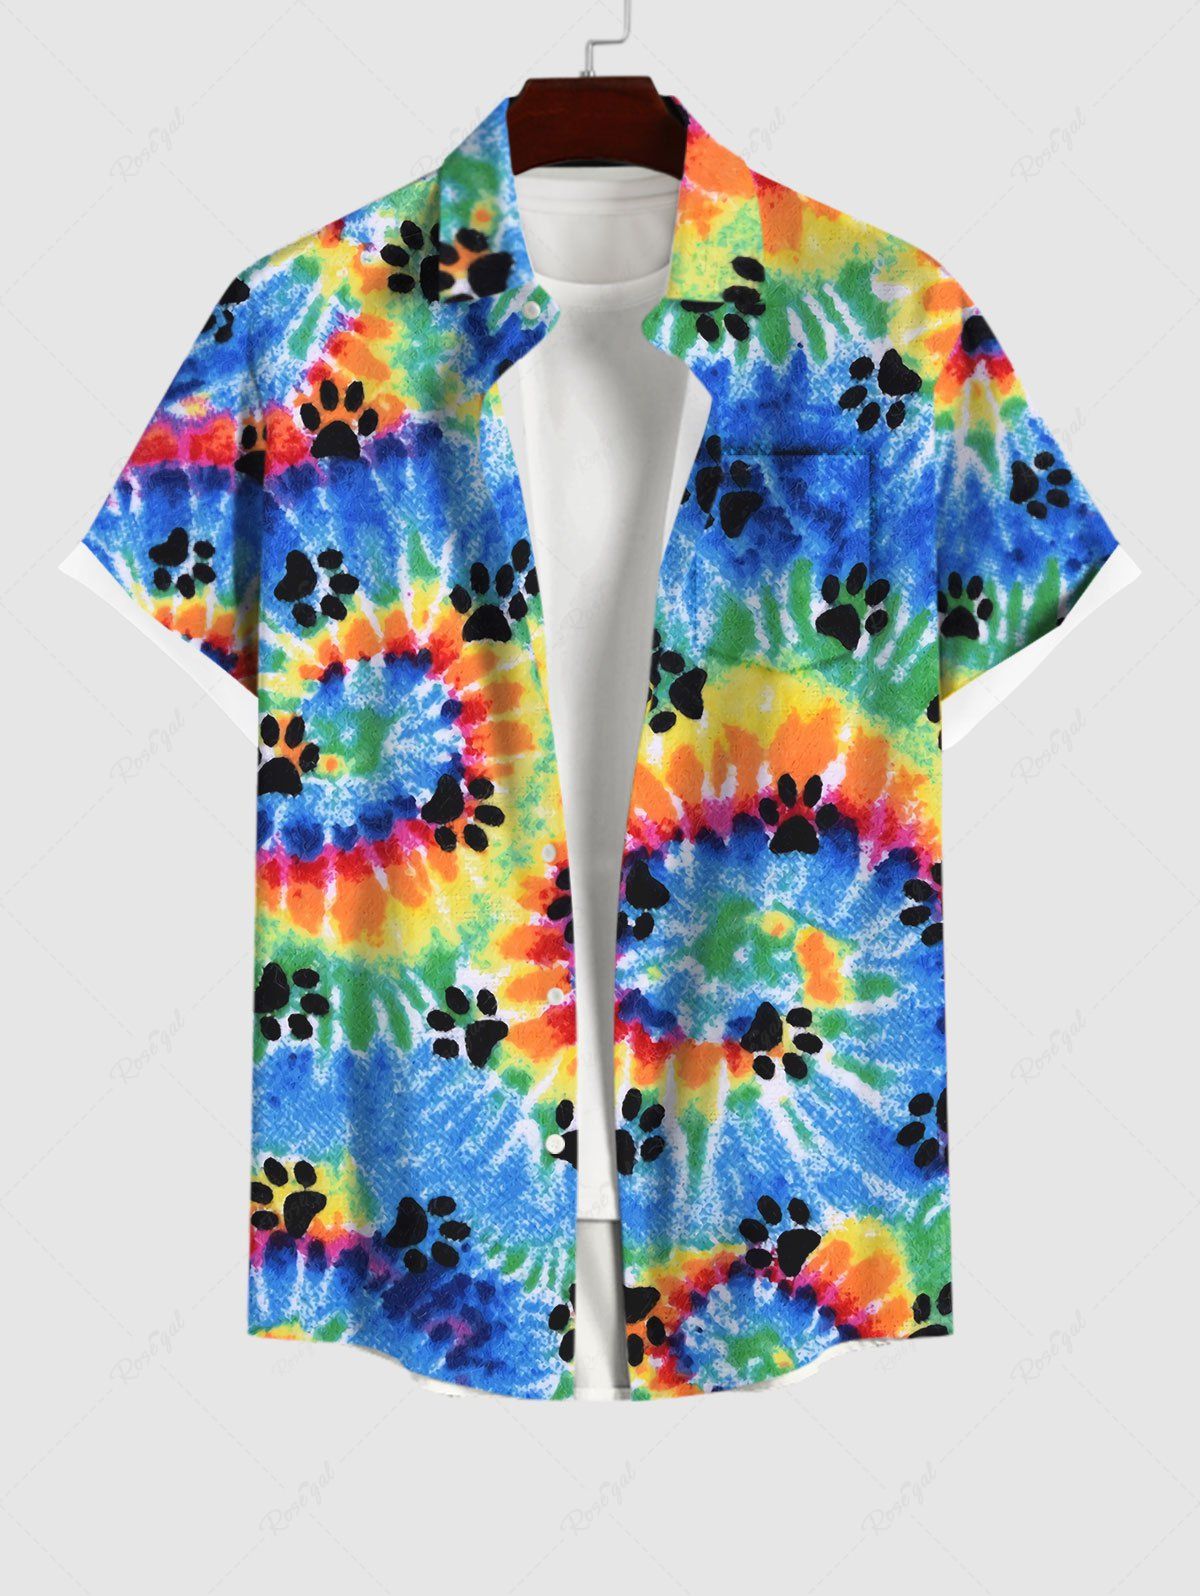 Hawaii Plus Size Turn-down Collar Spiral Watercolor Tie Dye Cat Paw Print Buttons Pocket Beach Shirt For Men Multi-A M